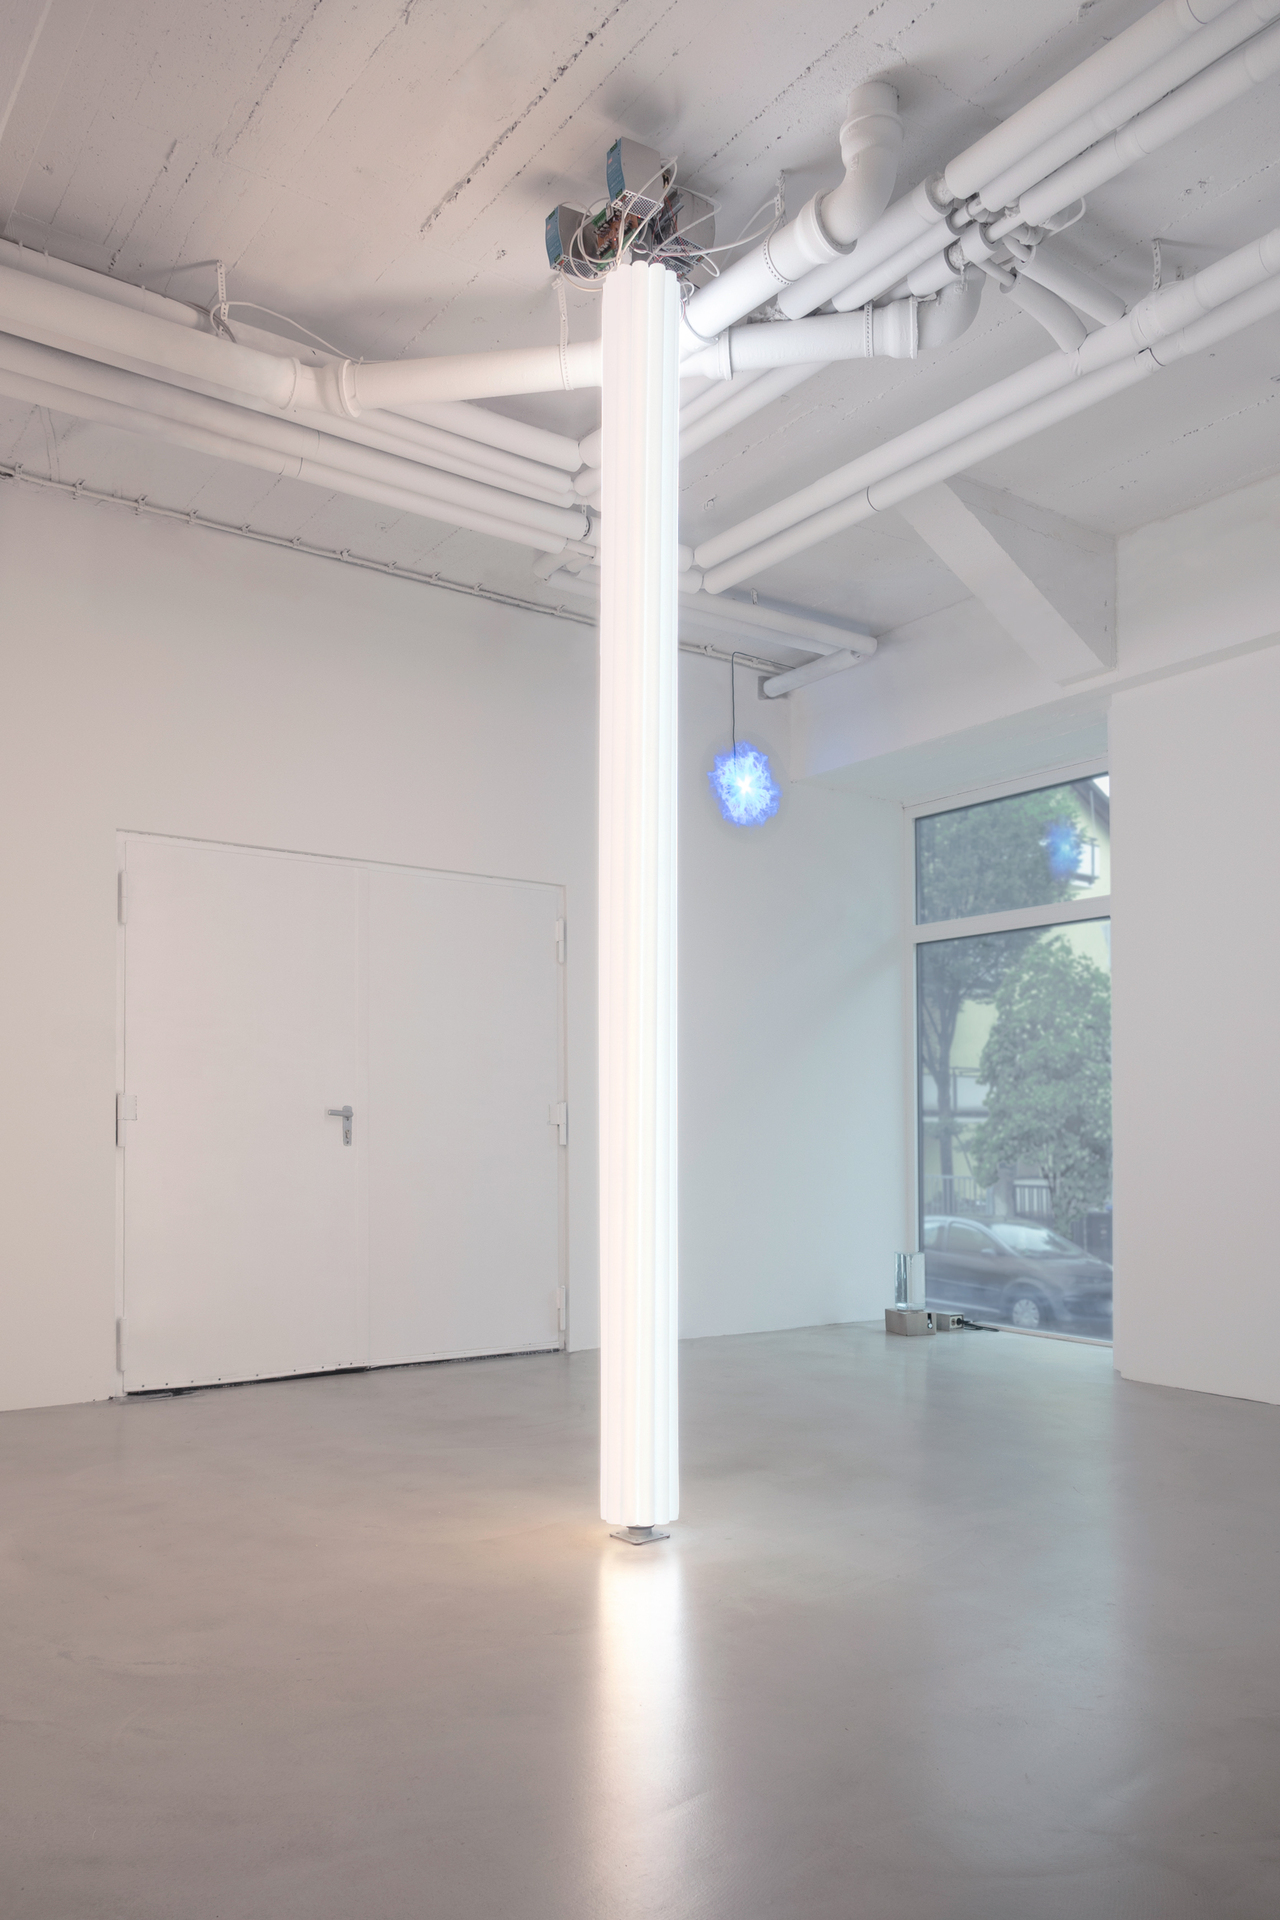 Susi Gelb - New Temperature, 2020, heavy-duty prop, controlled white LED light (Barthelme), cable, programming, ca. 337x22x22 cm